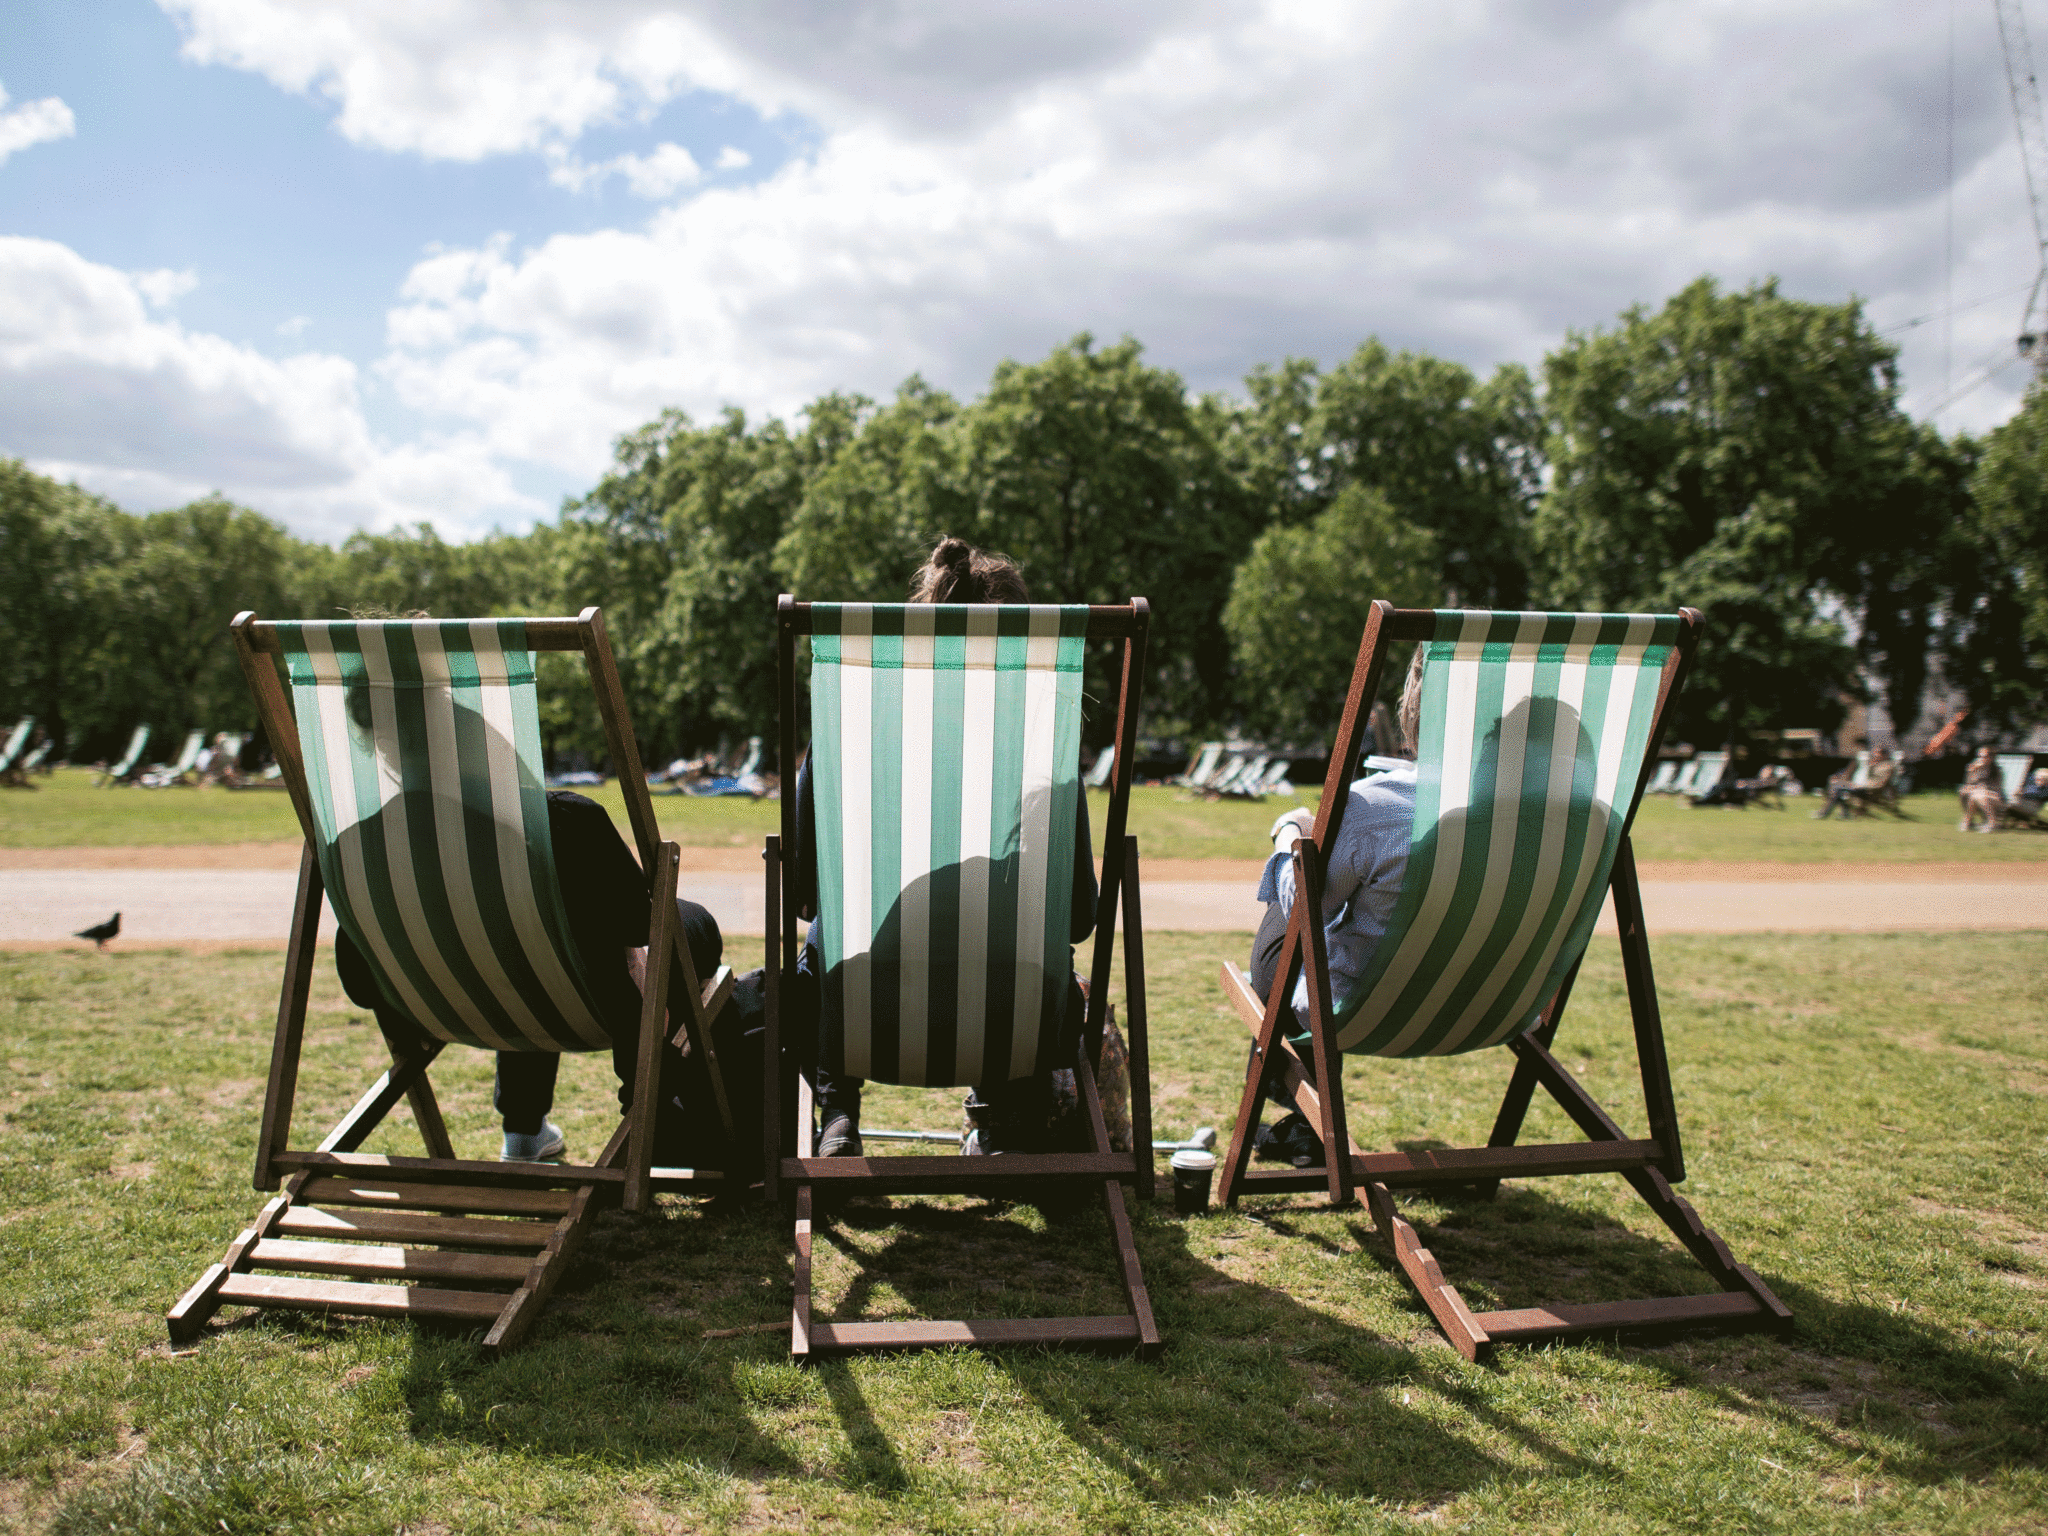 People sit in deckchairs as they enjoy the sun in Green Park, central London on June 3, 2015